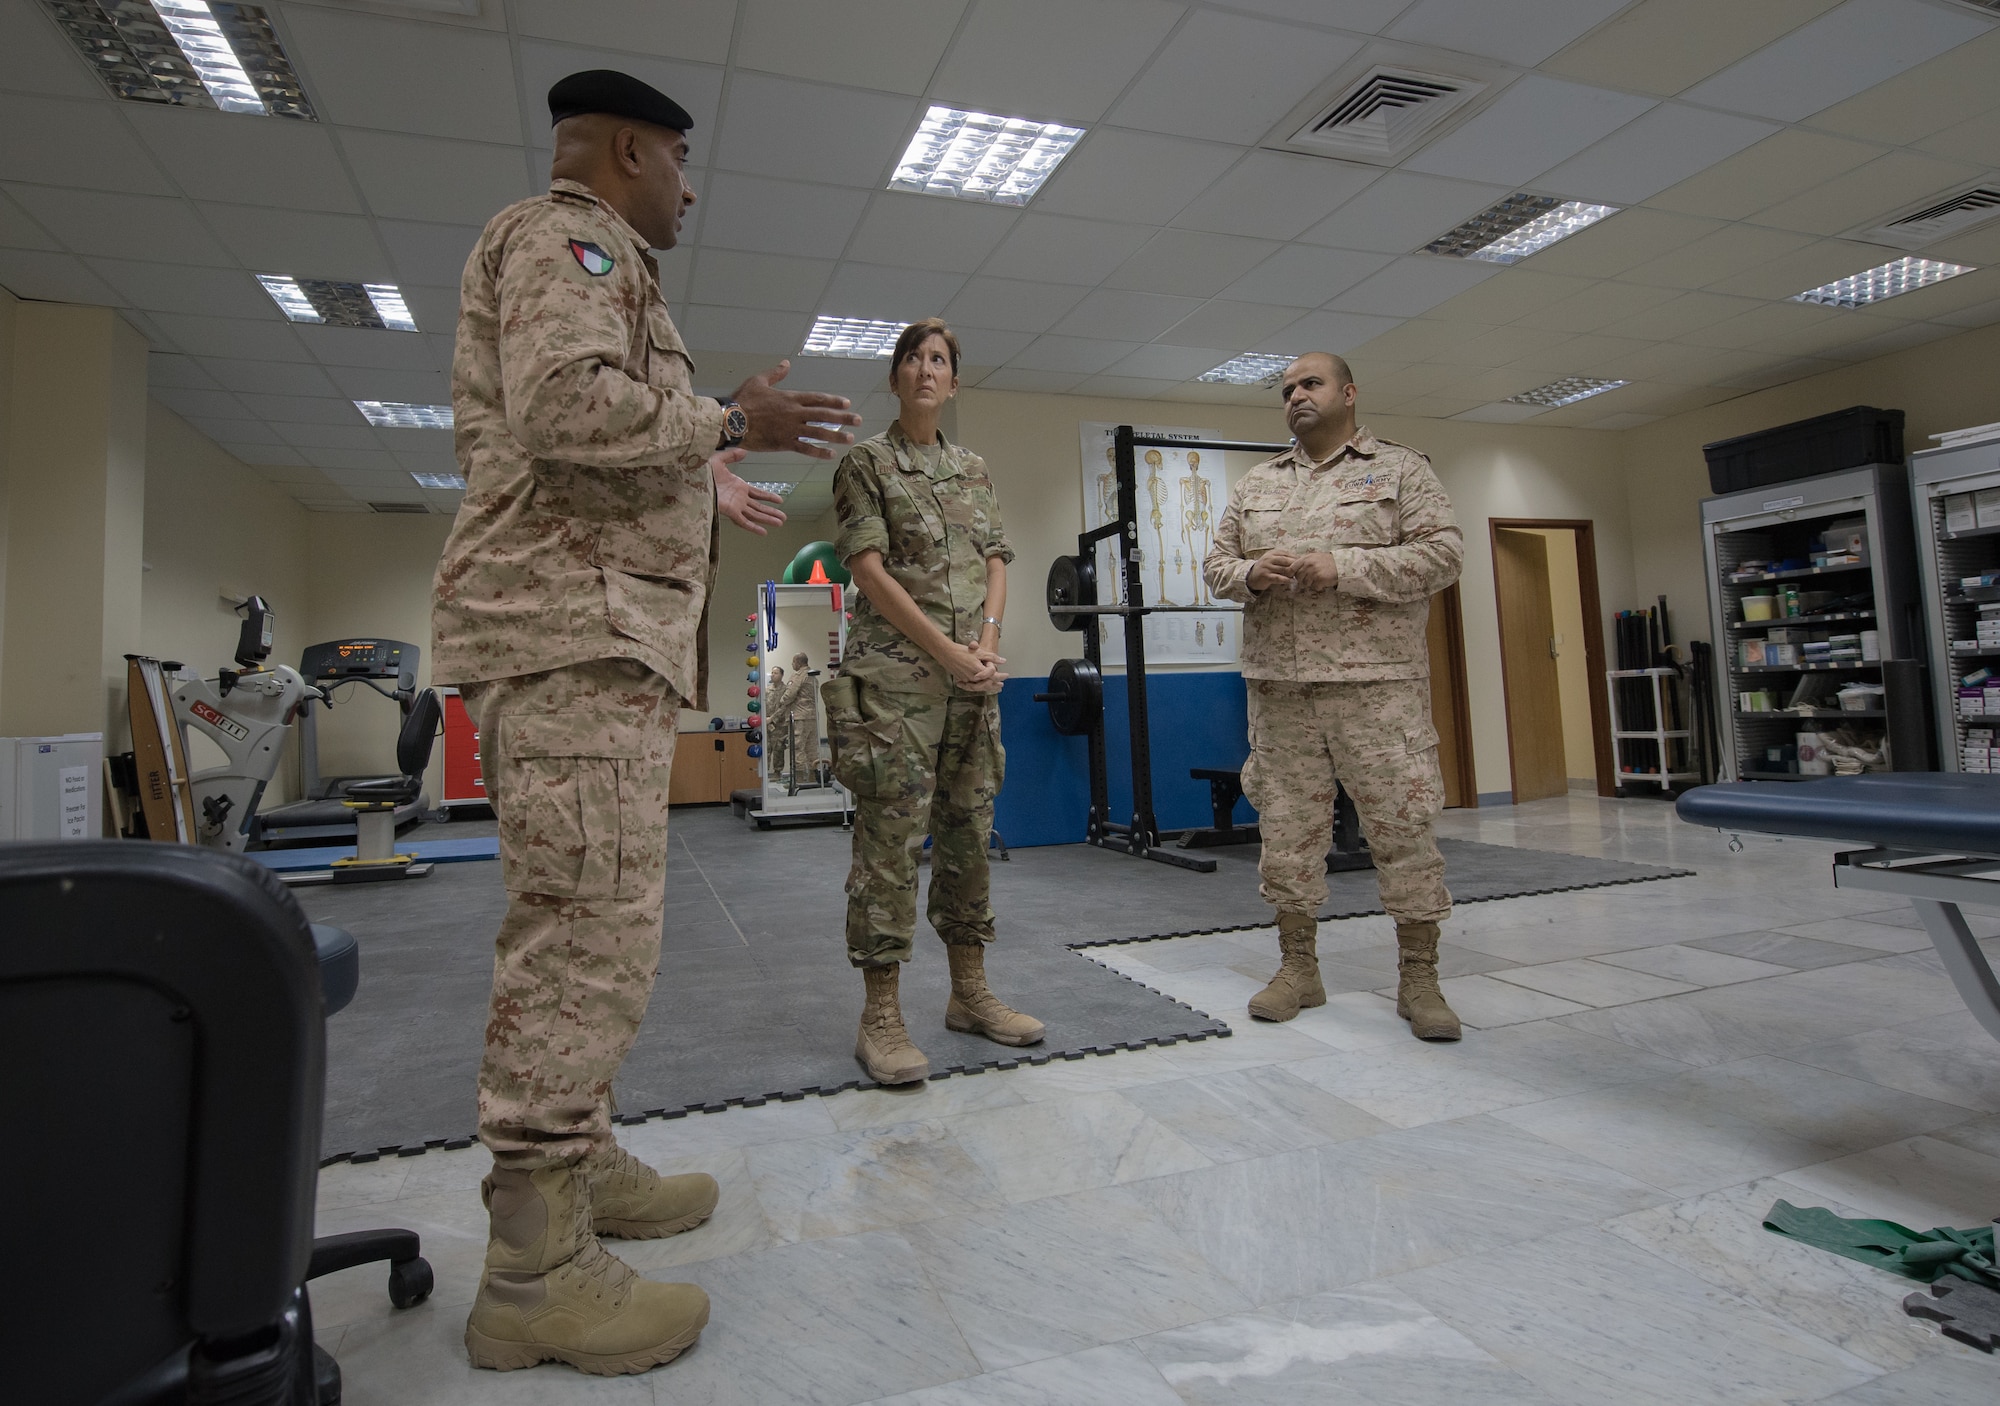 Kuwaiti army doctors and Colonels' Nawaf Jandoul Al-Dousari, left, and Raed R. Altajalli, right, have a discussion with Col. Courtney Finkbeiner, 386th Expeditionary Medical Group commander, while viewing the physical therapy rehabilitation room at the base clinic at Ali Al Salem Air Base, Kuwait, Oct. 16, 2019. Al-Dousari and Altajalli, director and assistant director of the North Military Medical Complex respectively, visited the 386th EMDG clinic to tour the facility, share ideas on improving medical care and discuss strengthening interoperability.  (U.S. Air Force photo by Tech. Sgt. Daniel Martinez)